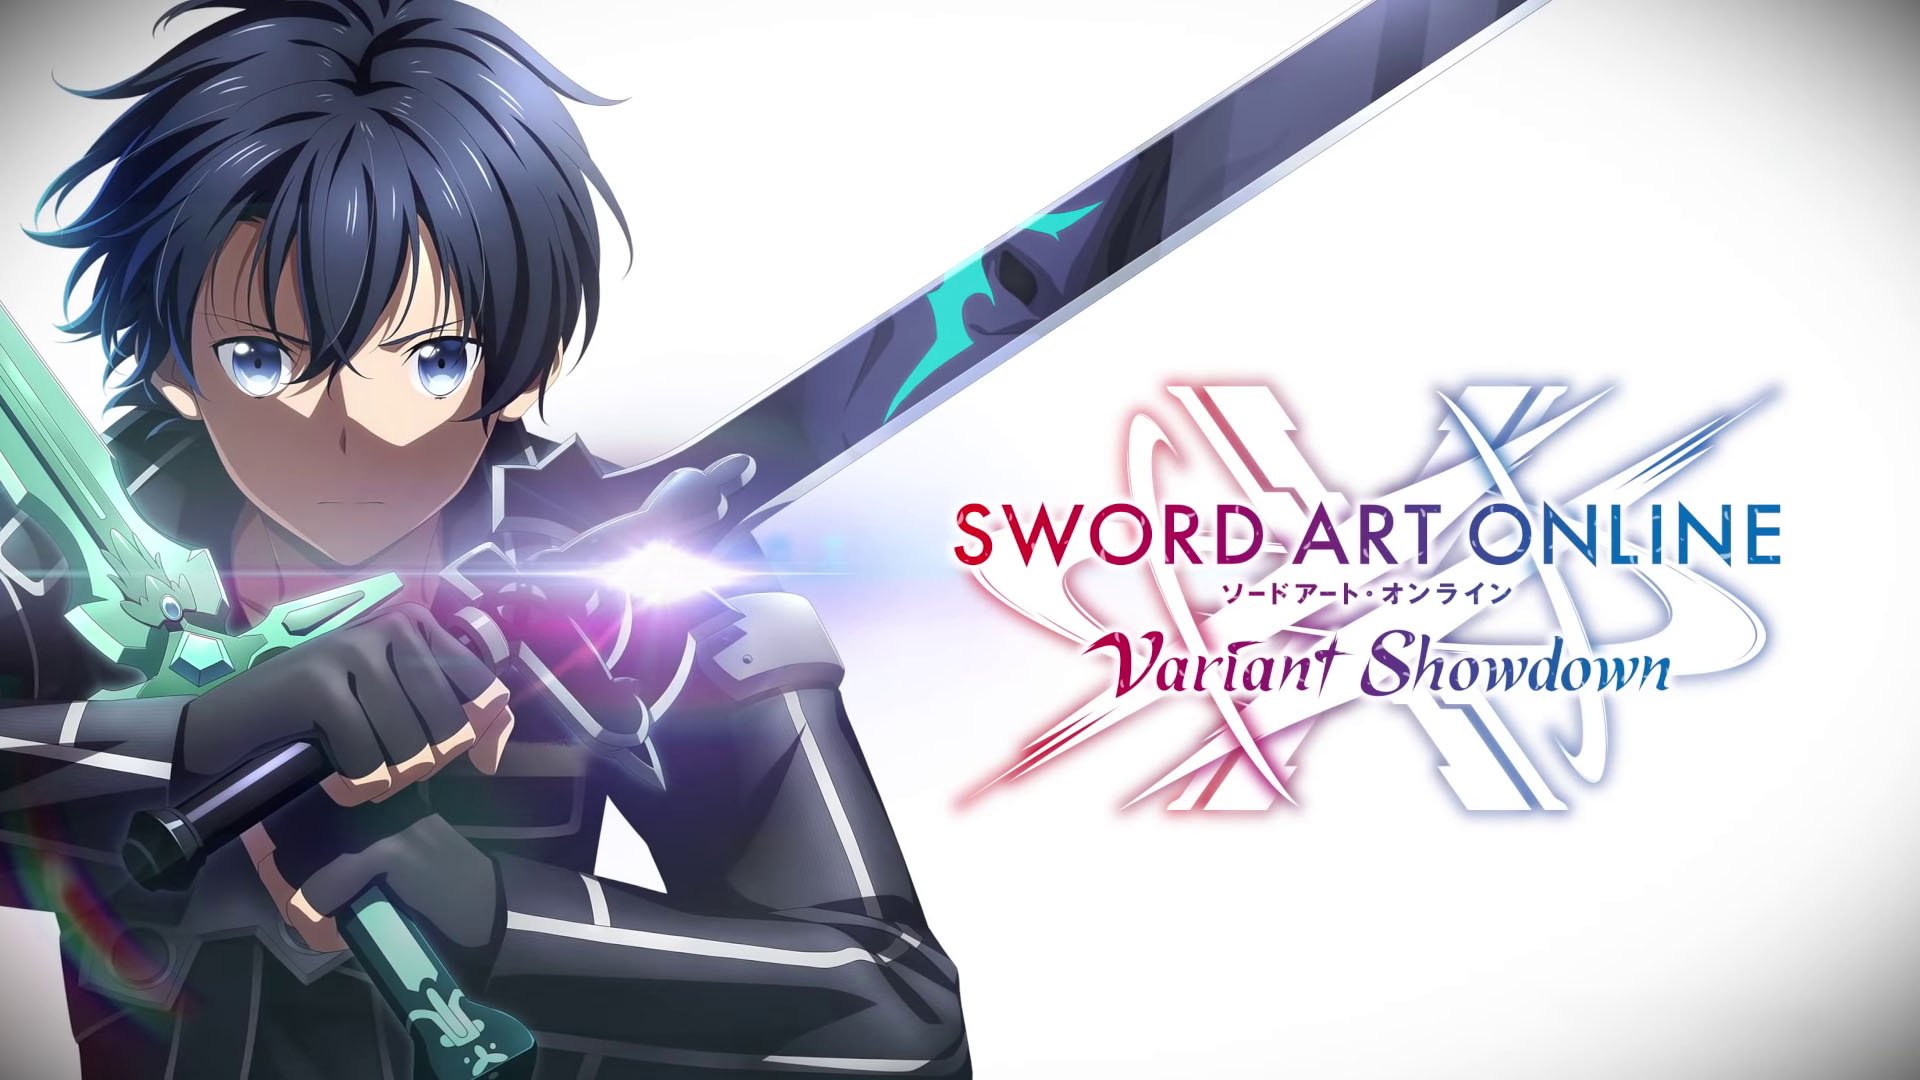 #
      Sword Art Online Variant Showdown announced for iOS, Android